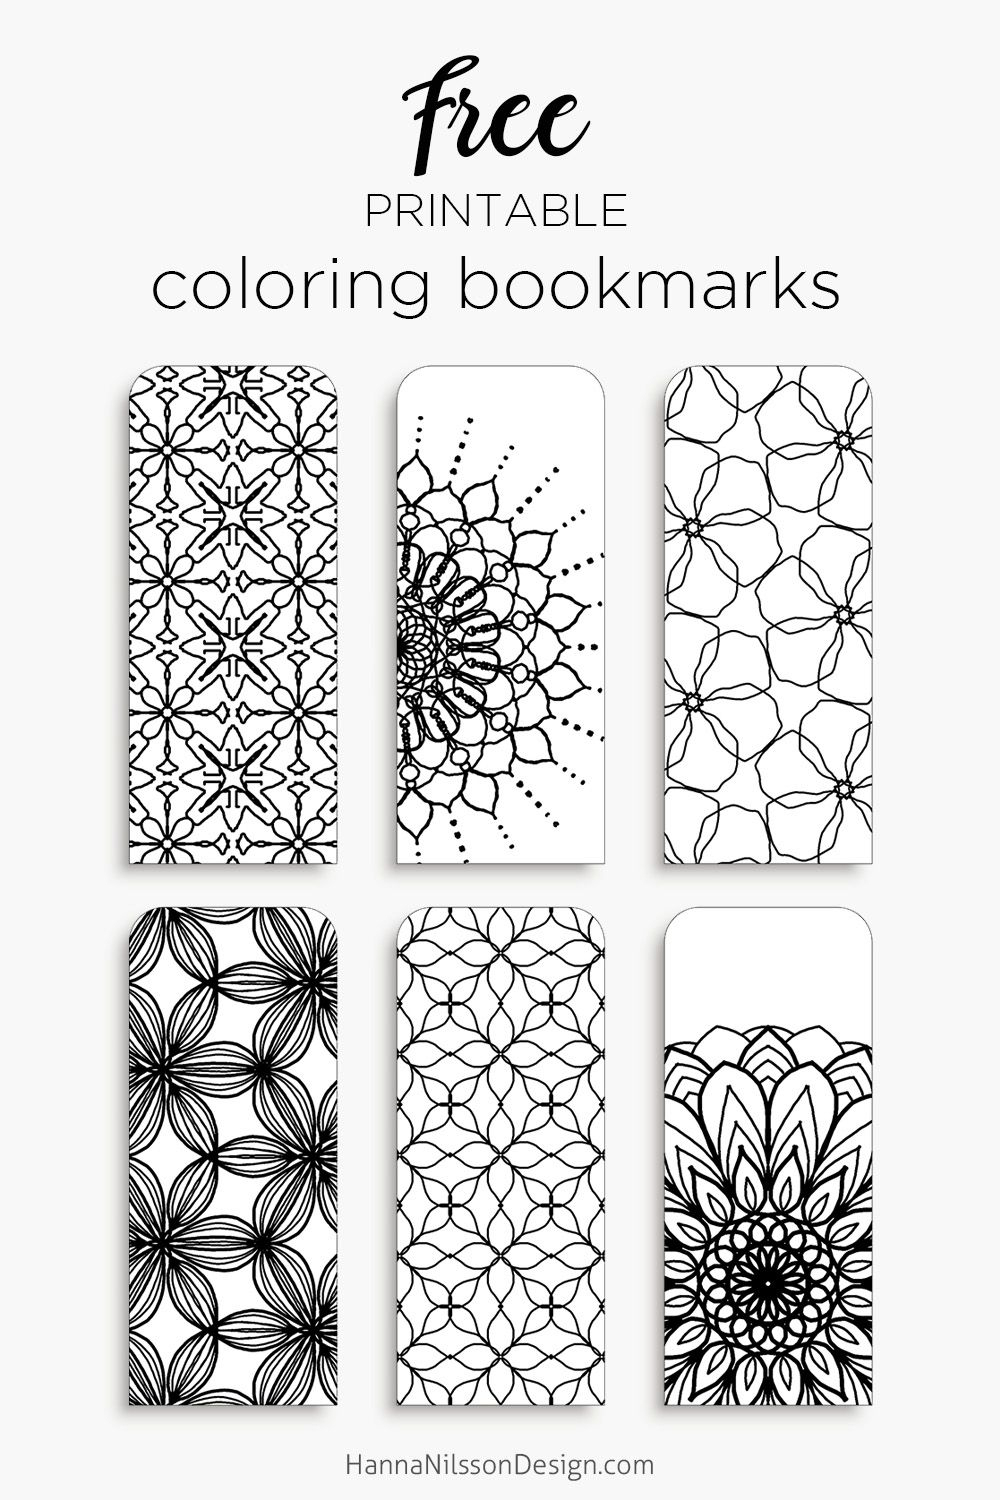 Coloring Bookmarks – Print, Color And Read | Hanna Nilsson Design - Free Printable Bookmarks To Color